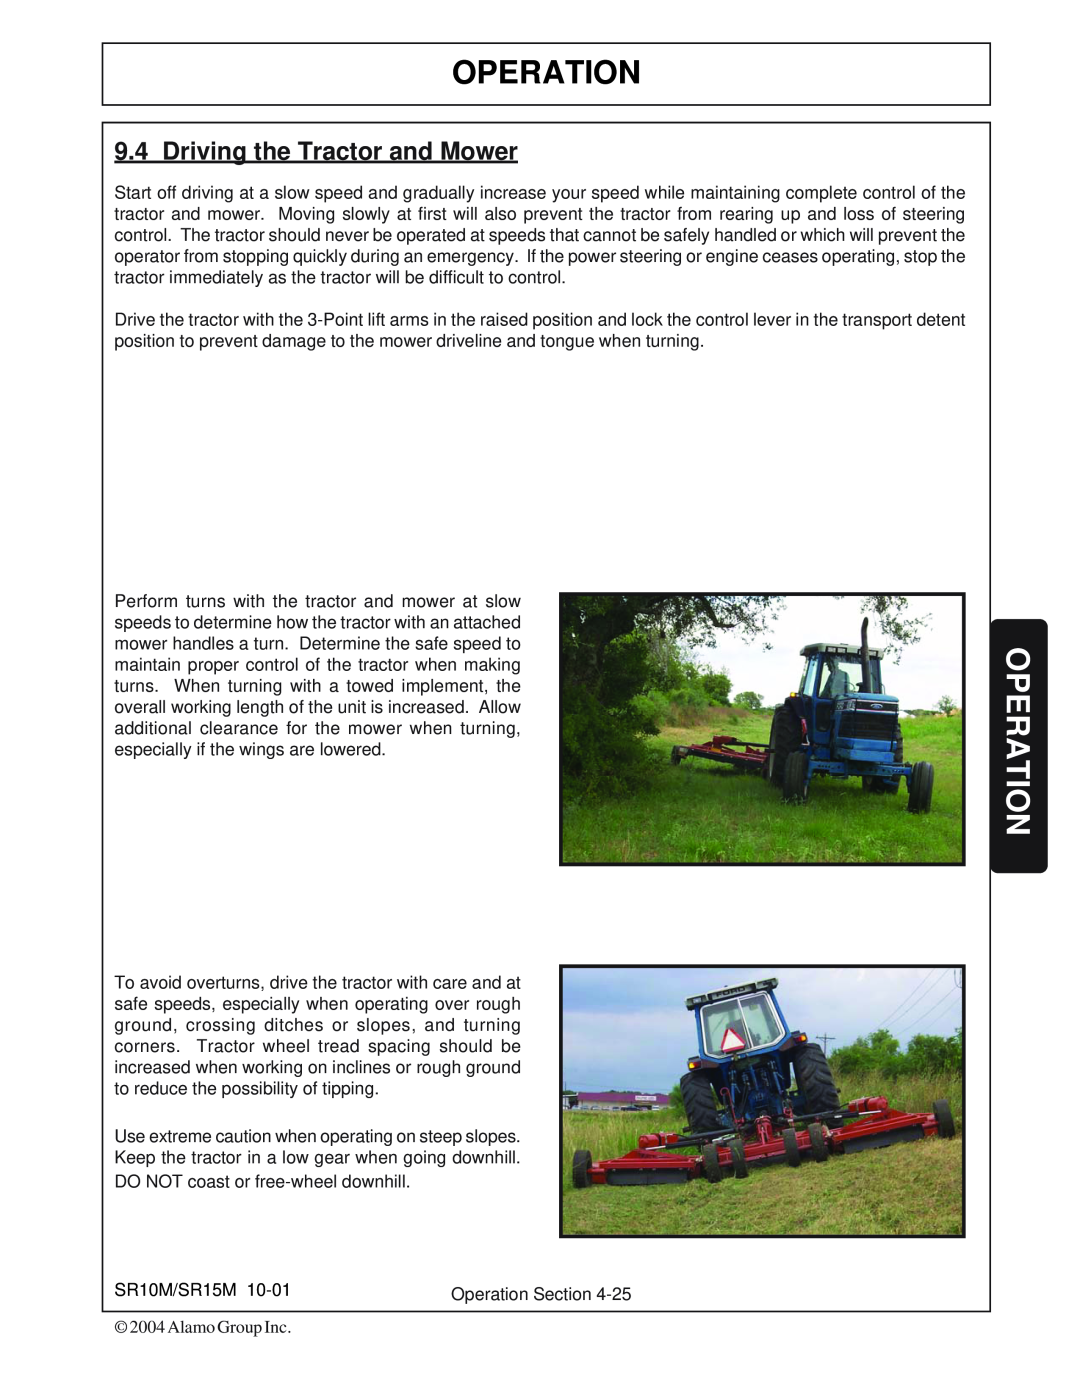 Servis-Rhino SR15M, SR10M manual Operation, Driving the Tractor and Mower 